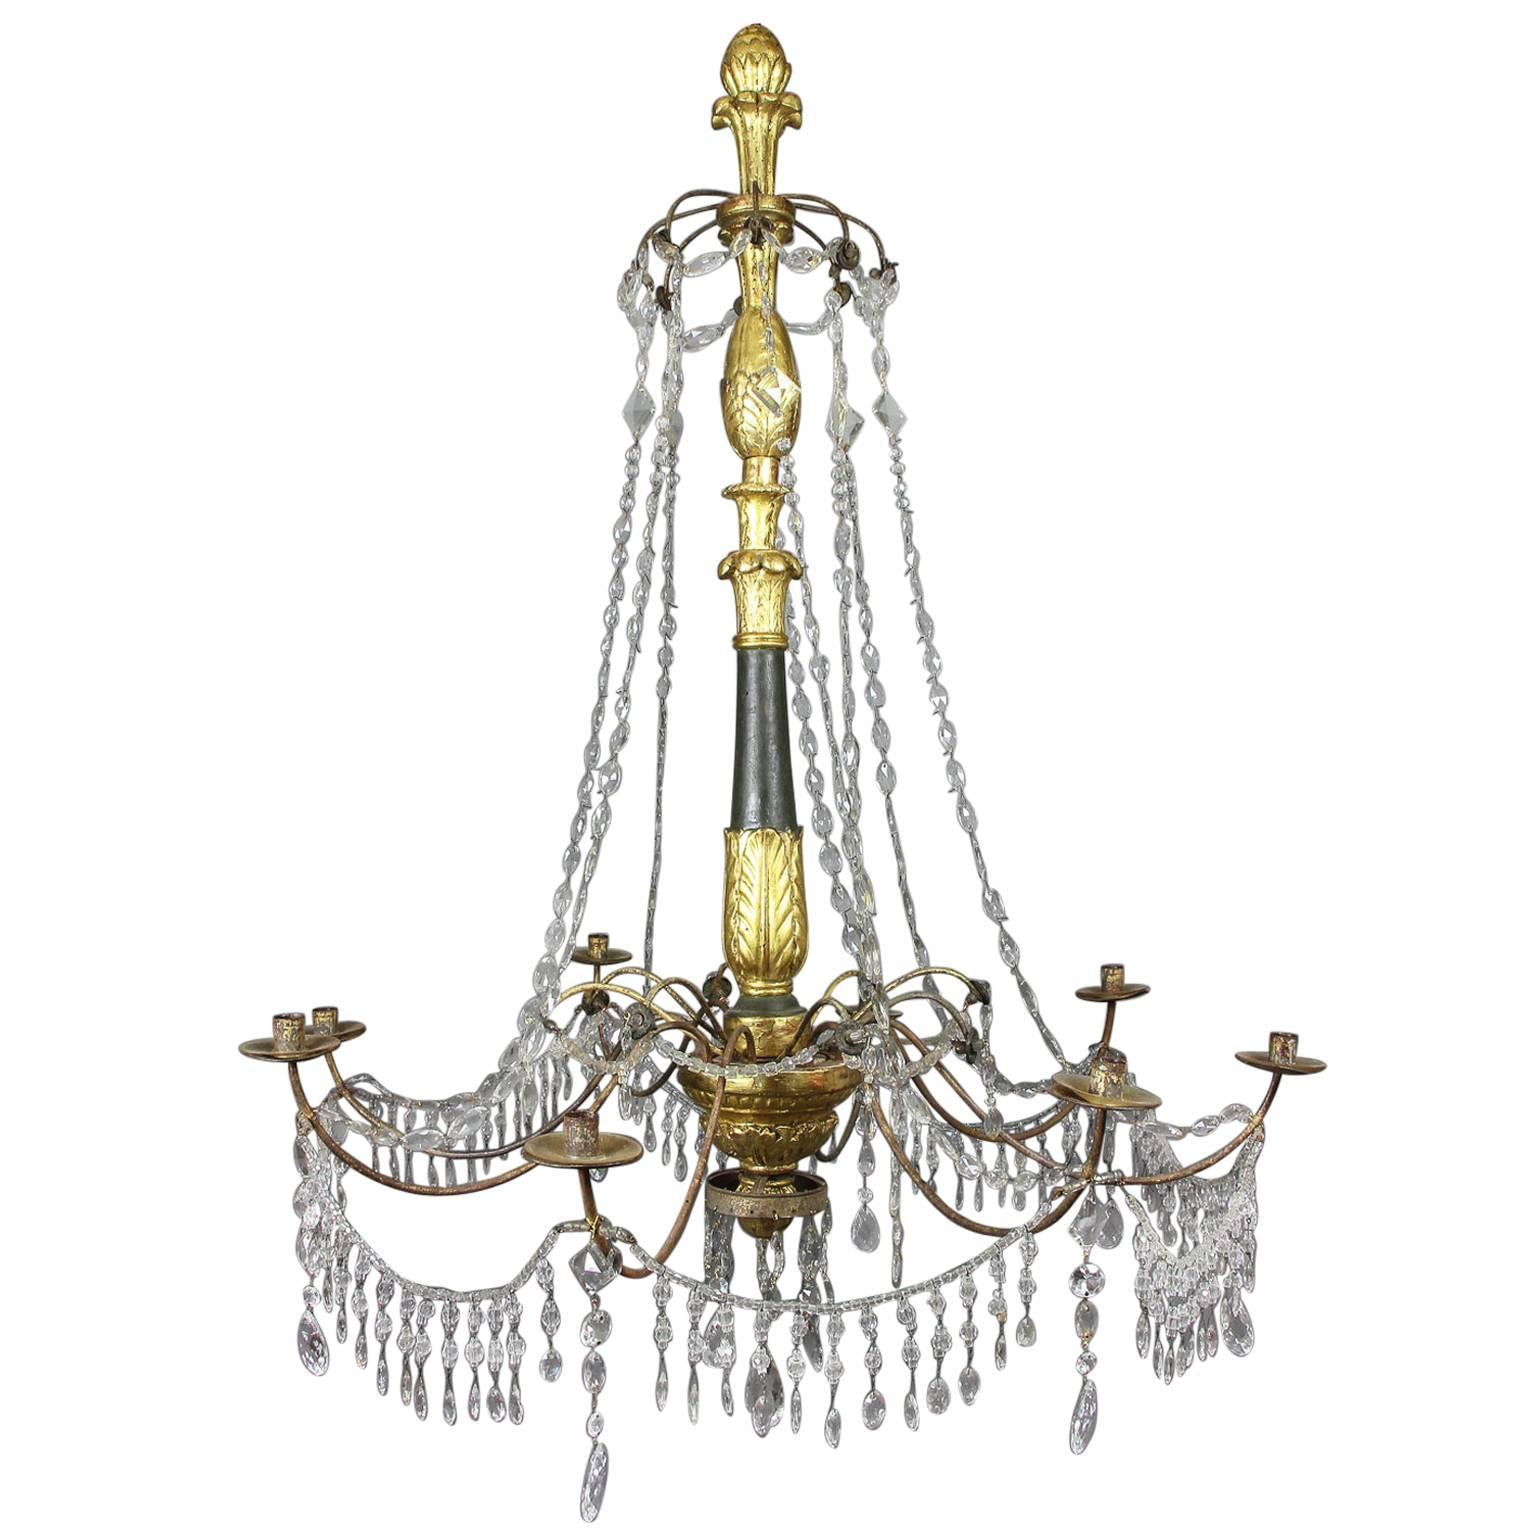 Italian Neoclassic Giltwood and Cut-Glass Chandelier